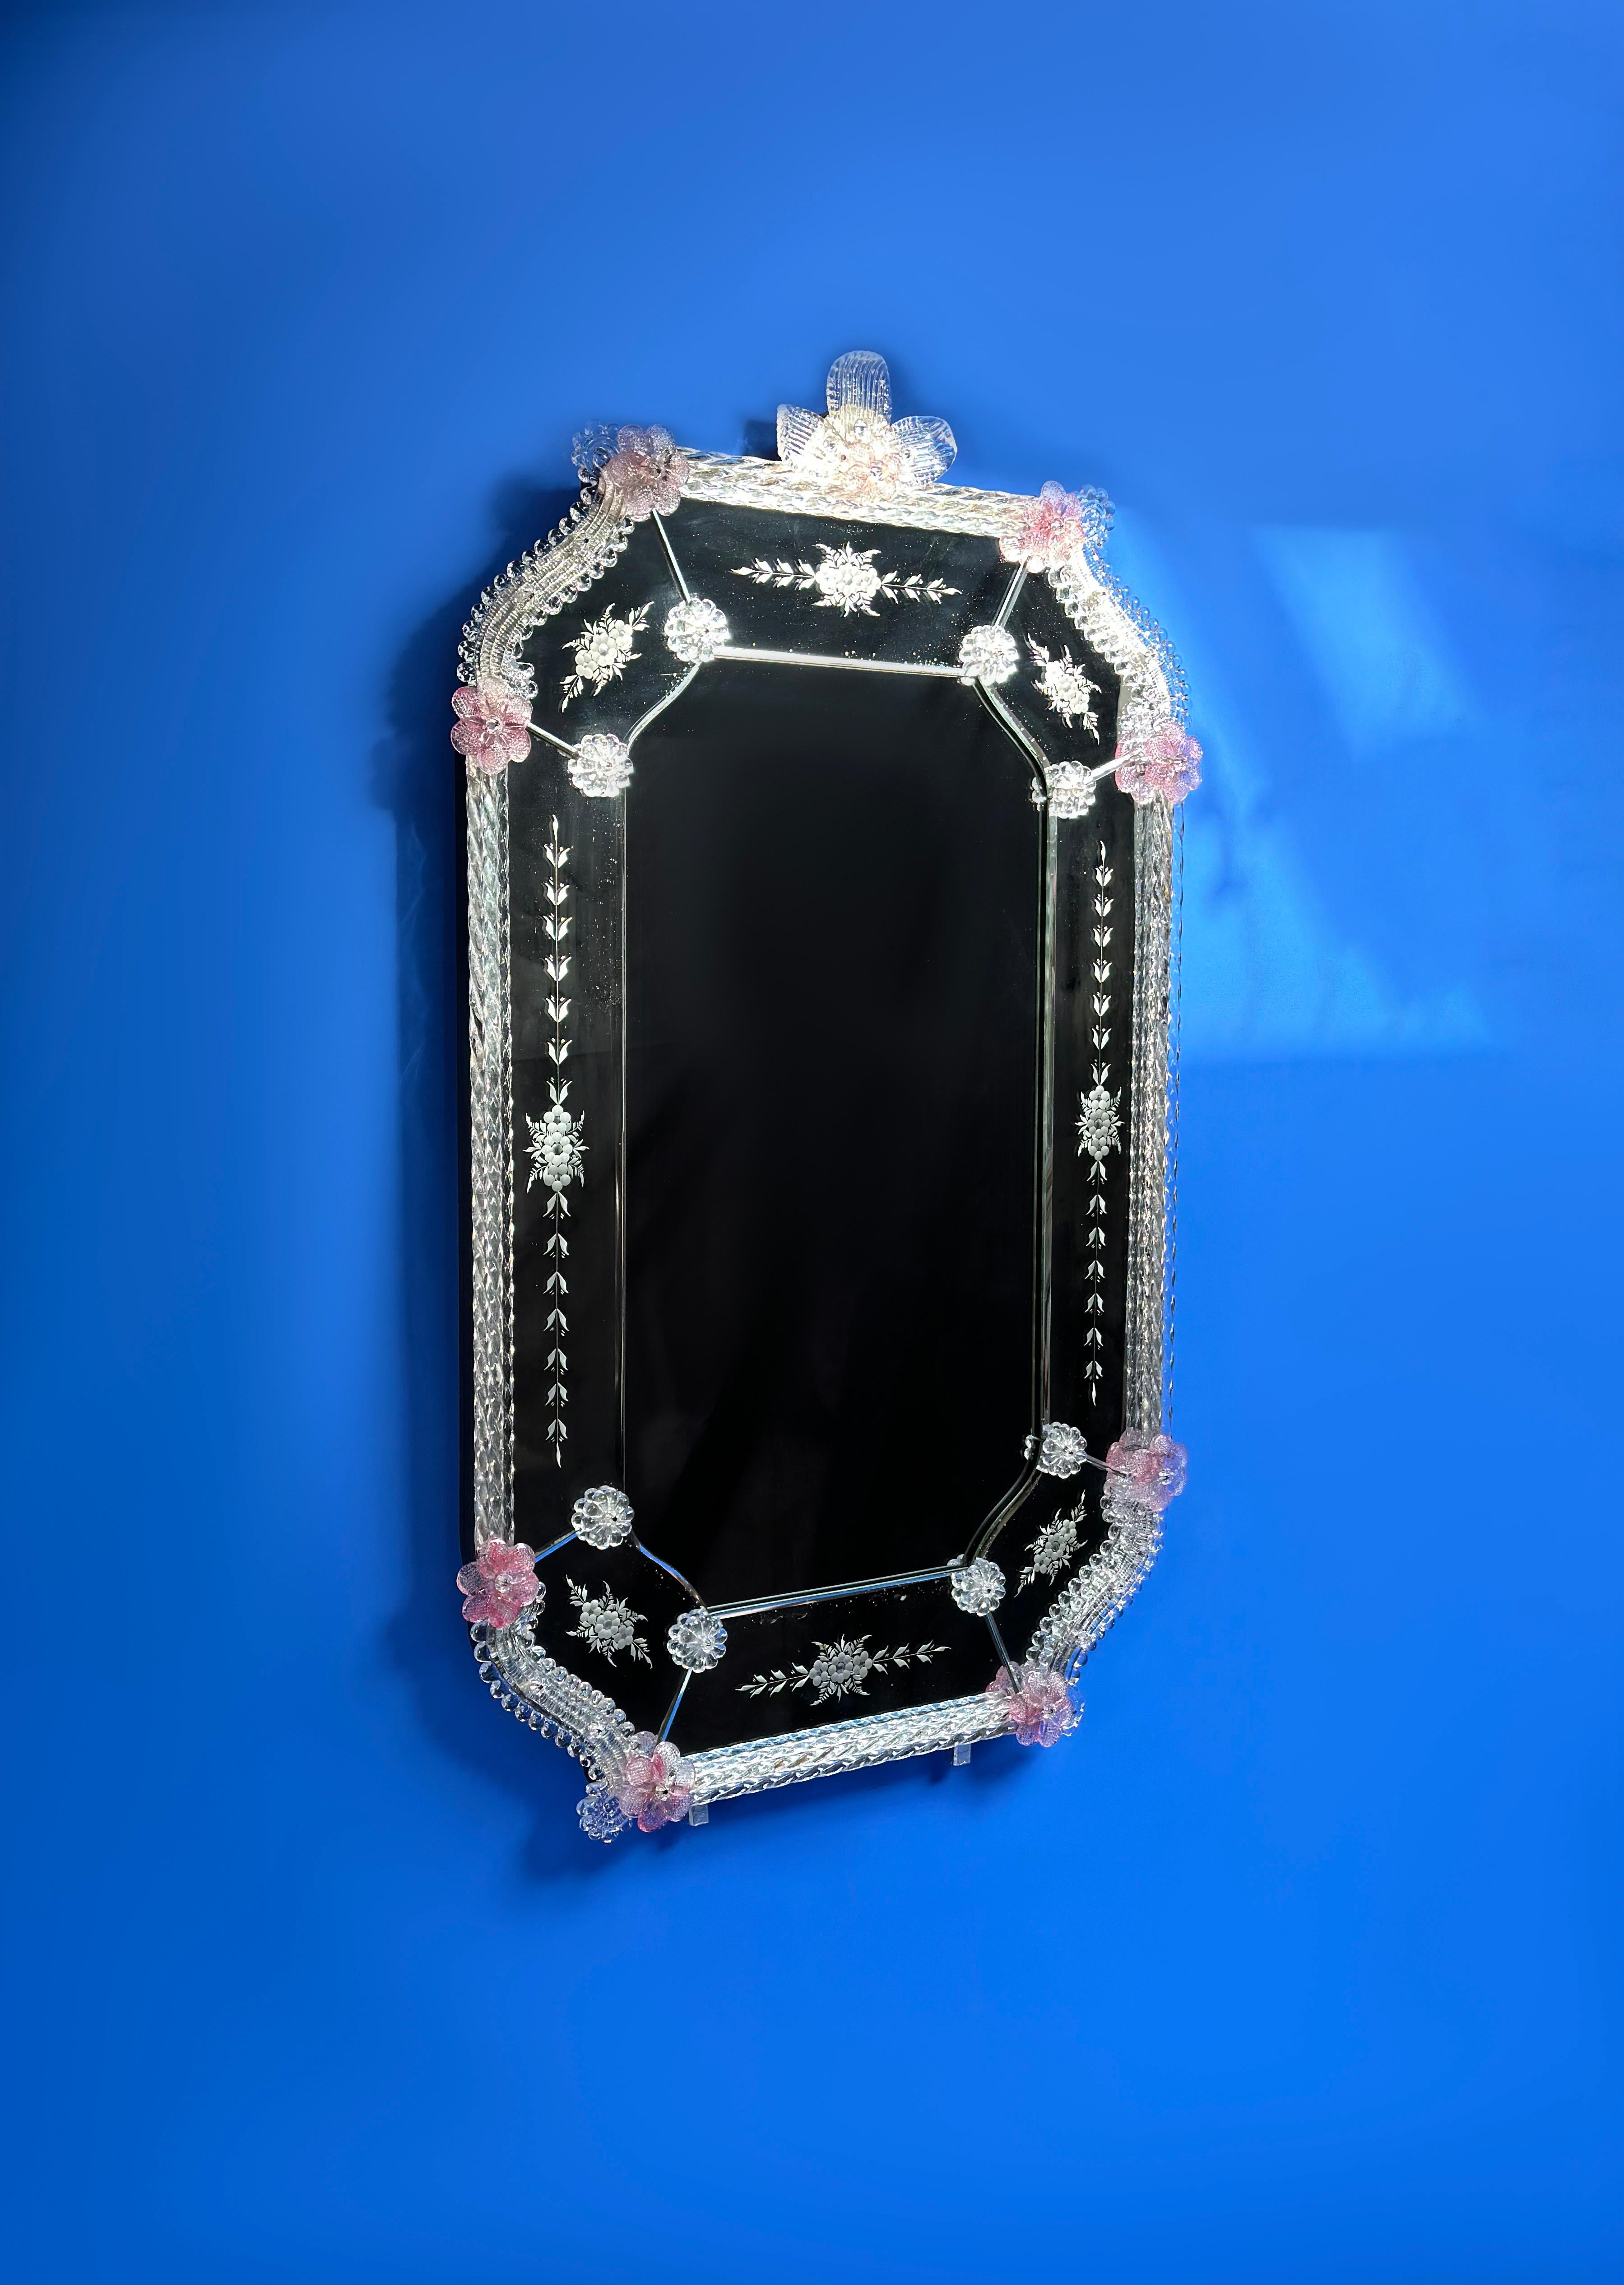 

Handcrafted in the 1960s by master artisans of Murano, this vintage Venetian mirror is a testament to the exquisite craftsmanship of Venetian artisans... It features a frame adorned with crystal-clear, spiral-twist rods interspersed with